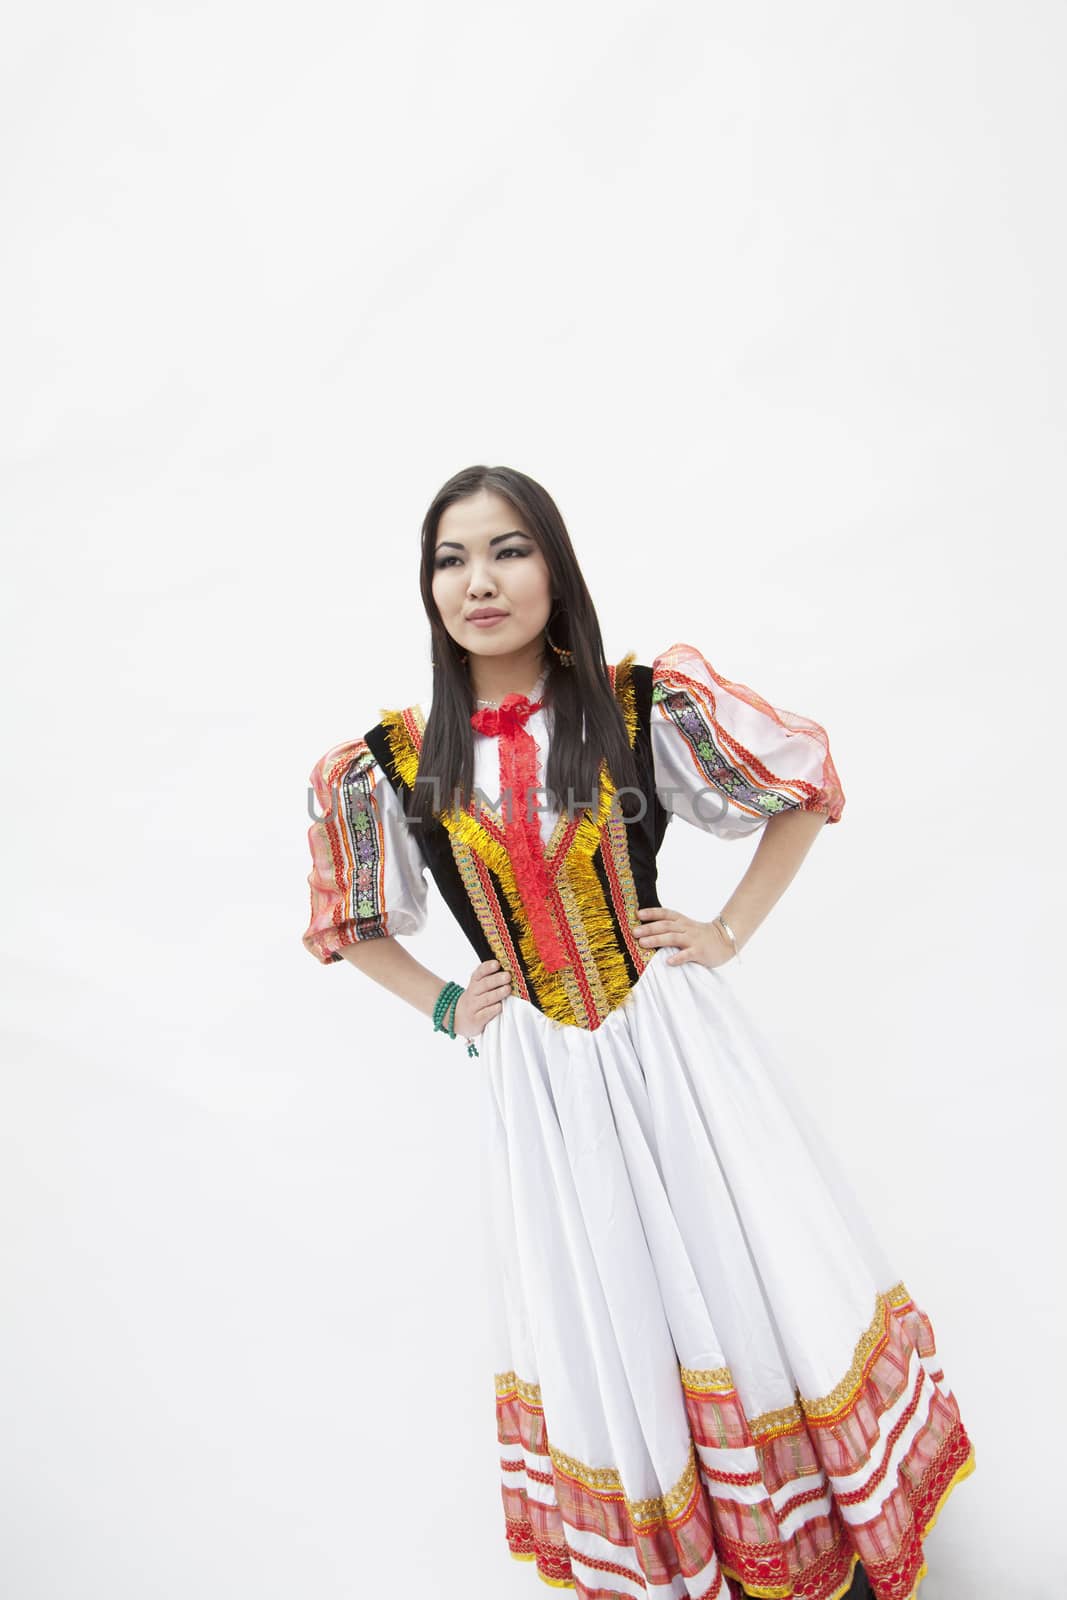 Portrait of young smiling woman with hands on hips in traditional clothing, studio shot by XiXinXing